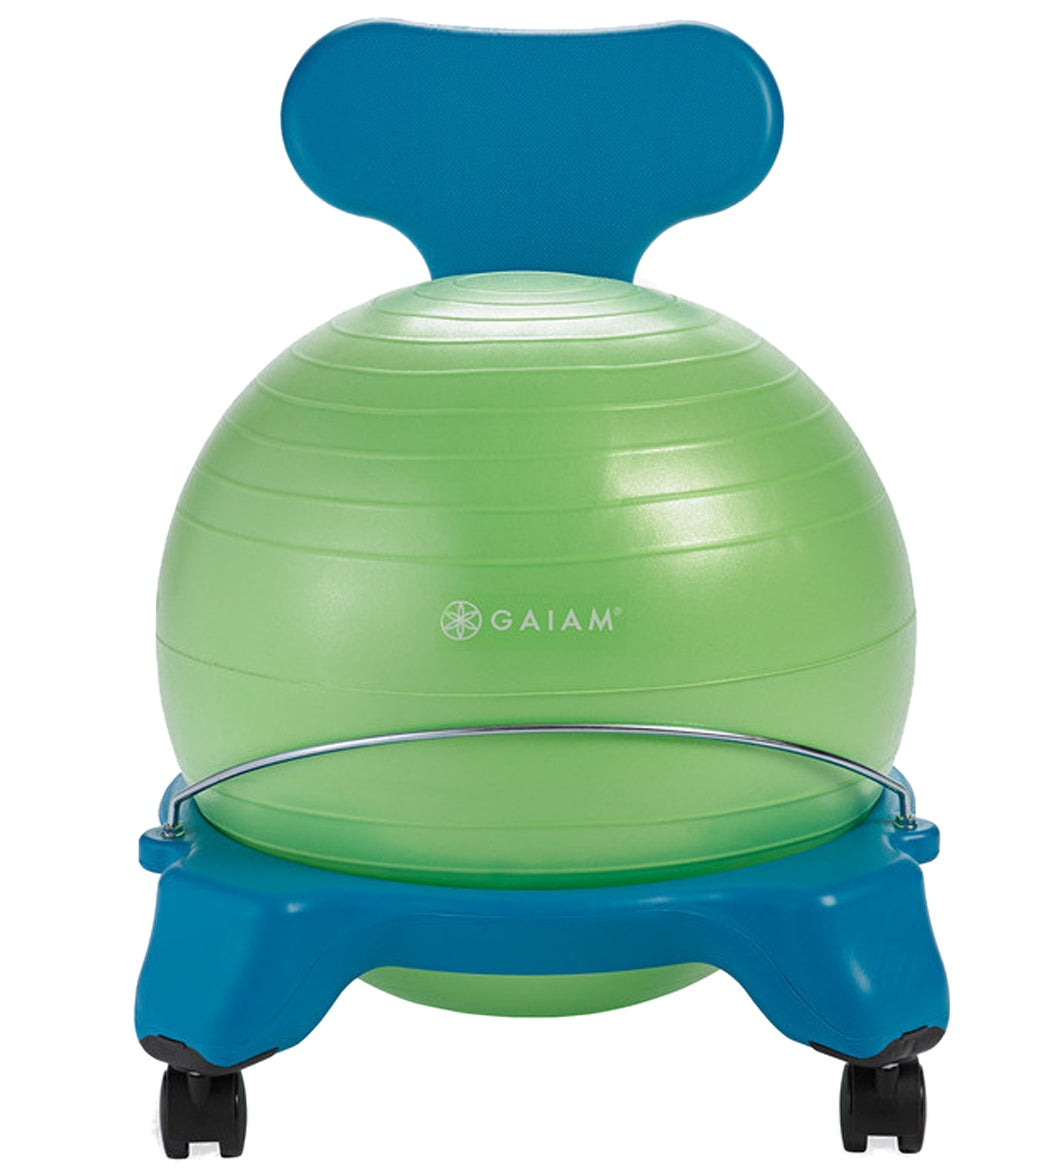 Gaiam Ultimate Balance Ball Chair Review